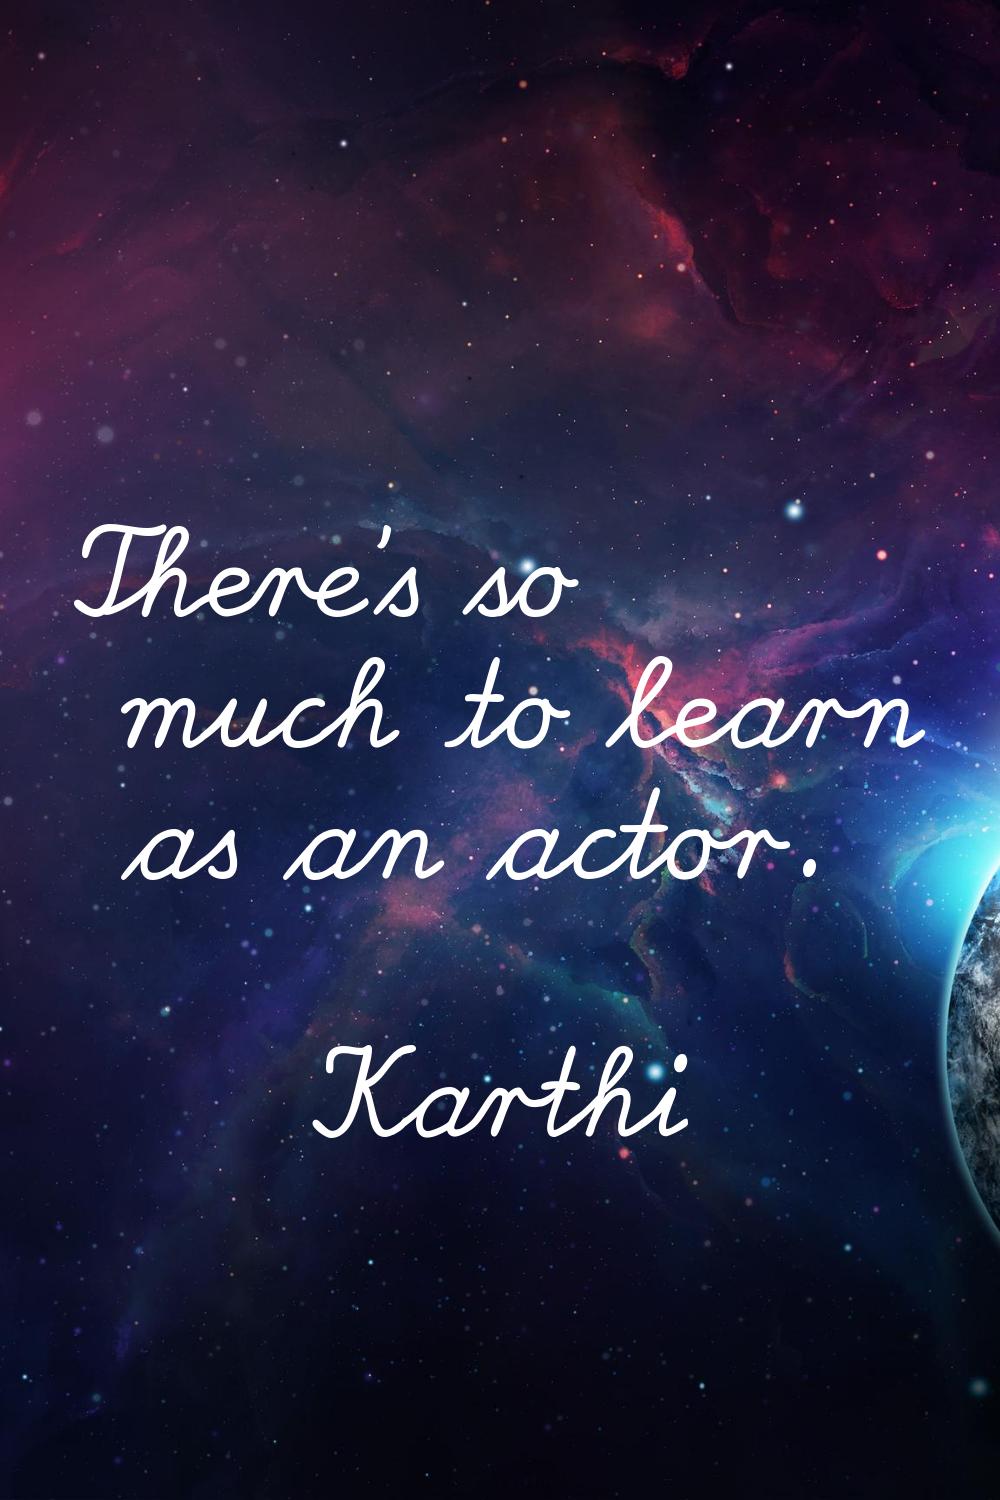 There's so much to learn as an actor.